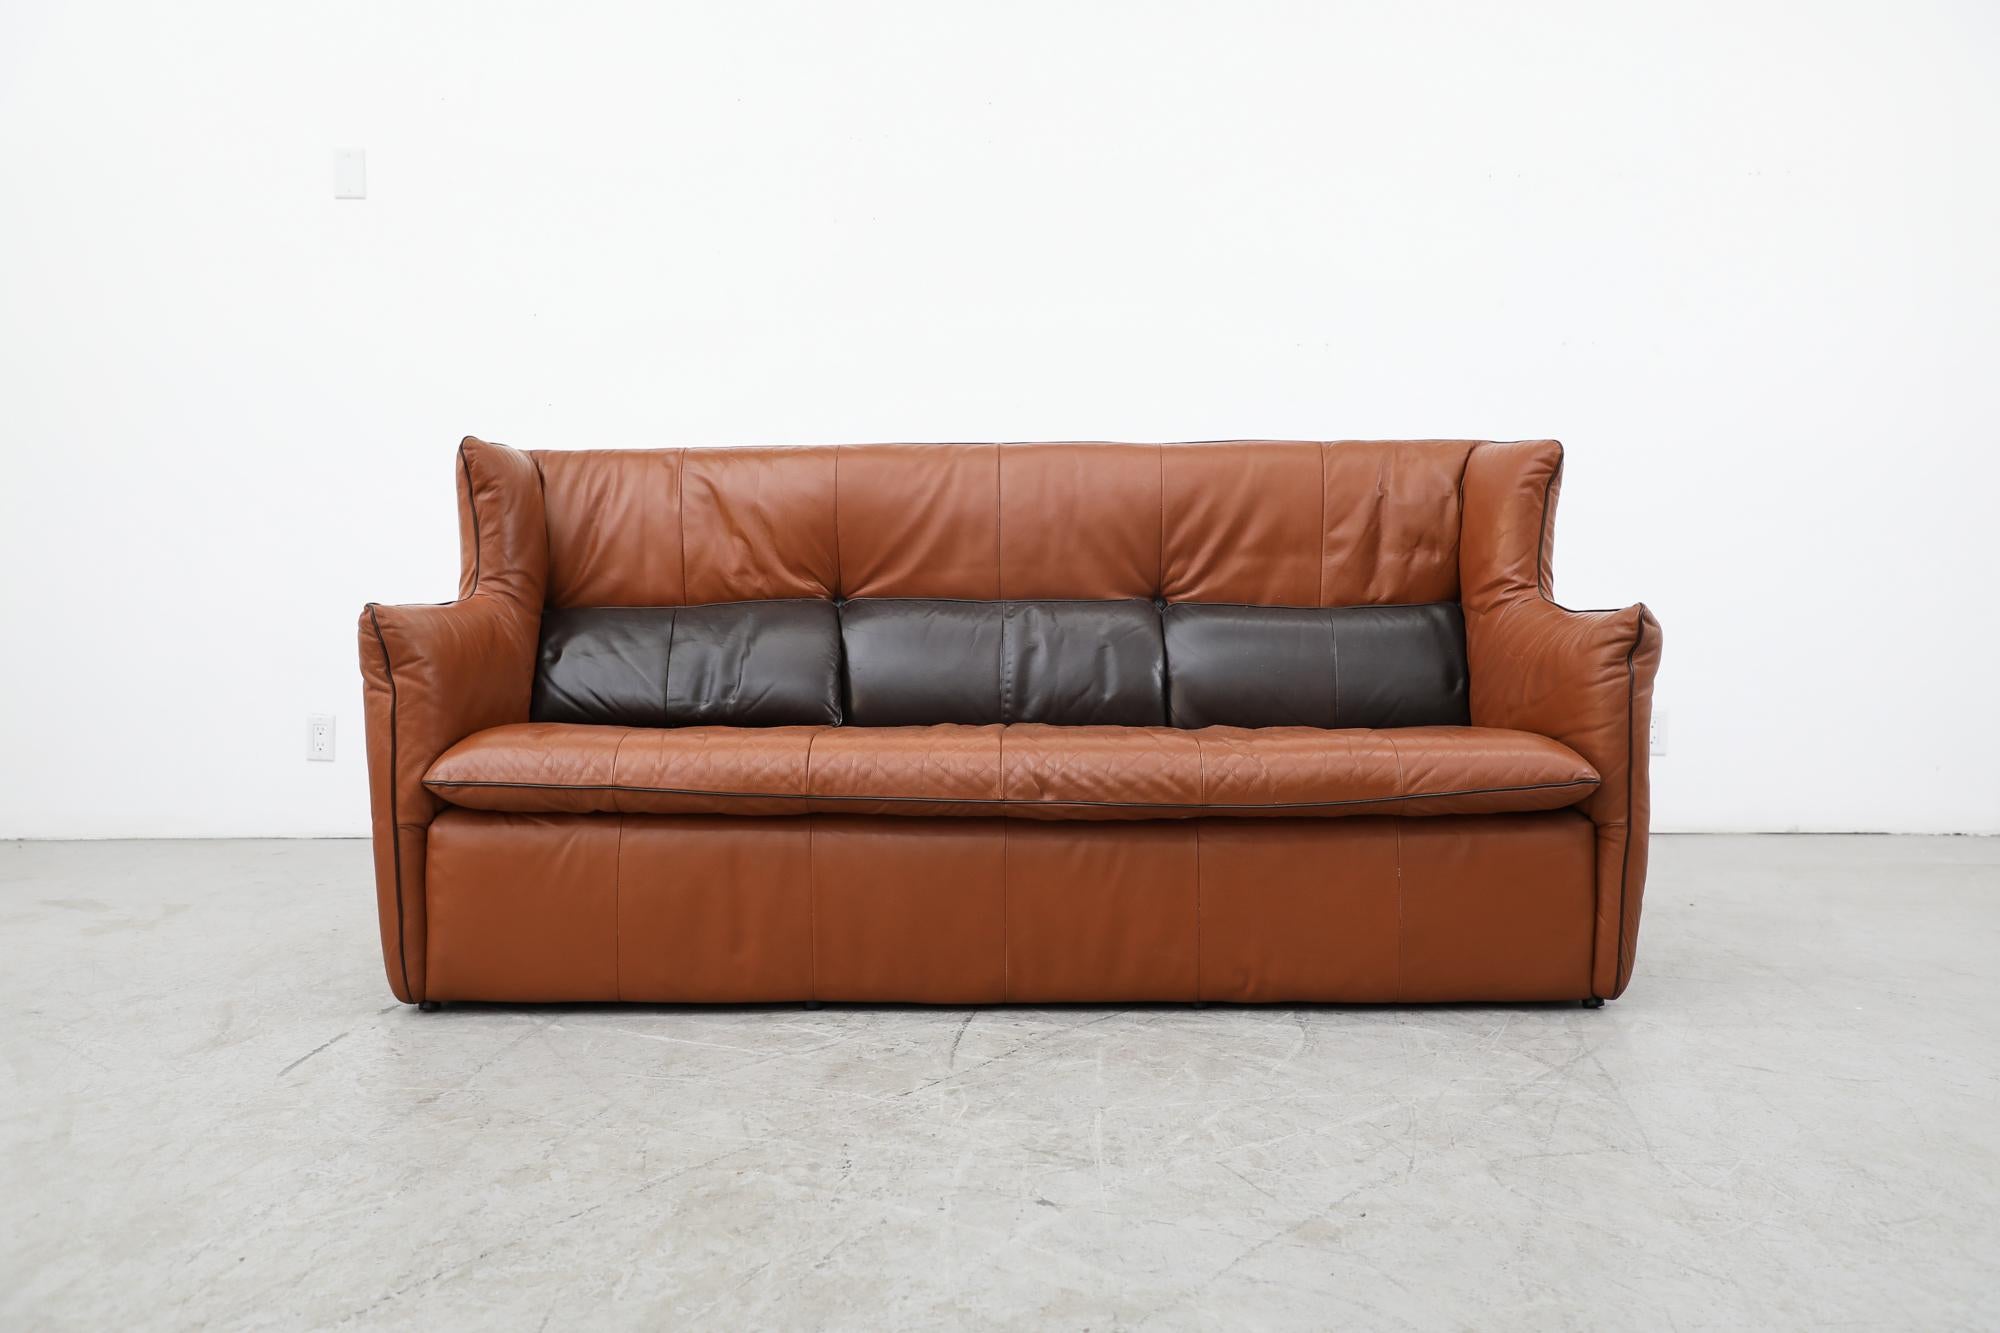 High back cognac leather sofa by Gerard van Den Berg for Montis. Cognac leather with 3 dark chocolate leather buttoned on back pillows and matching chocolate leather piping. In original condition with wear consistent with its age and use.